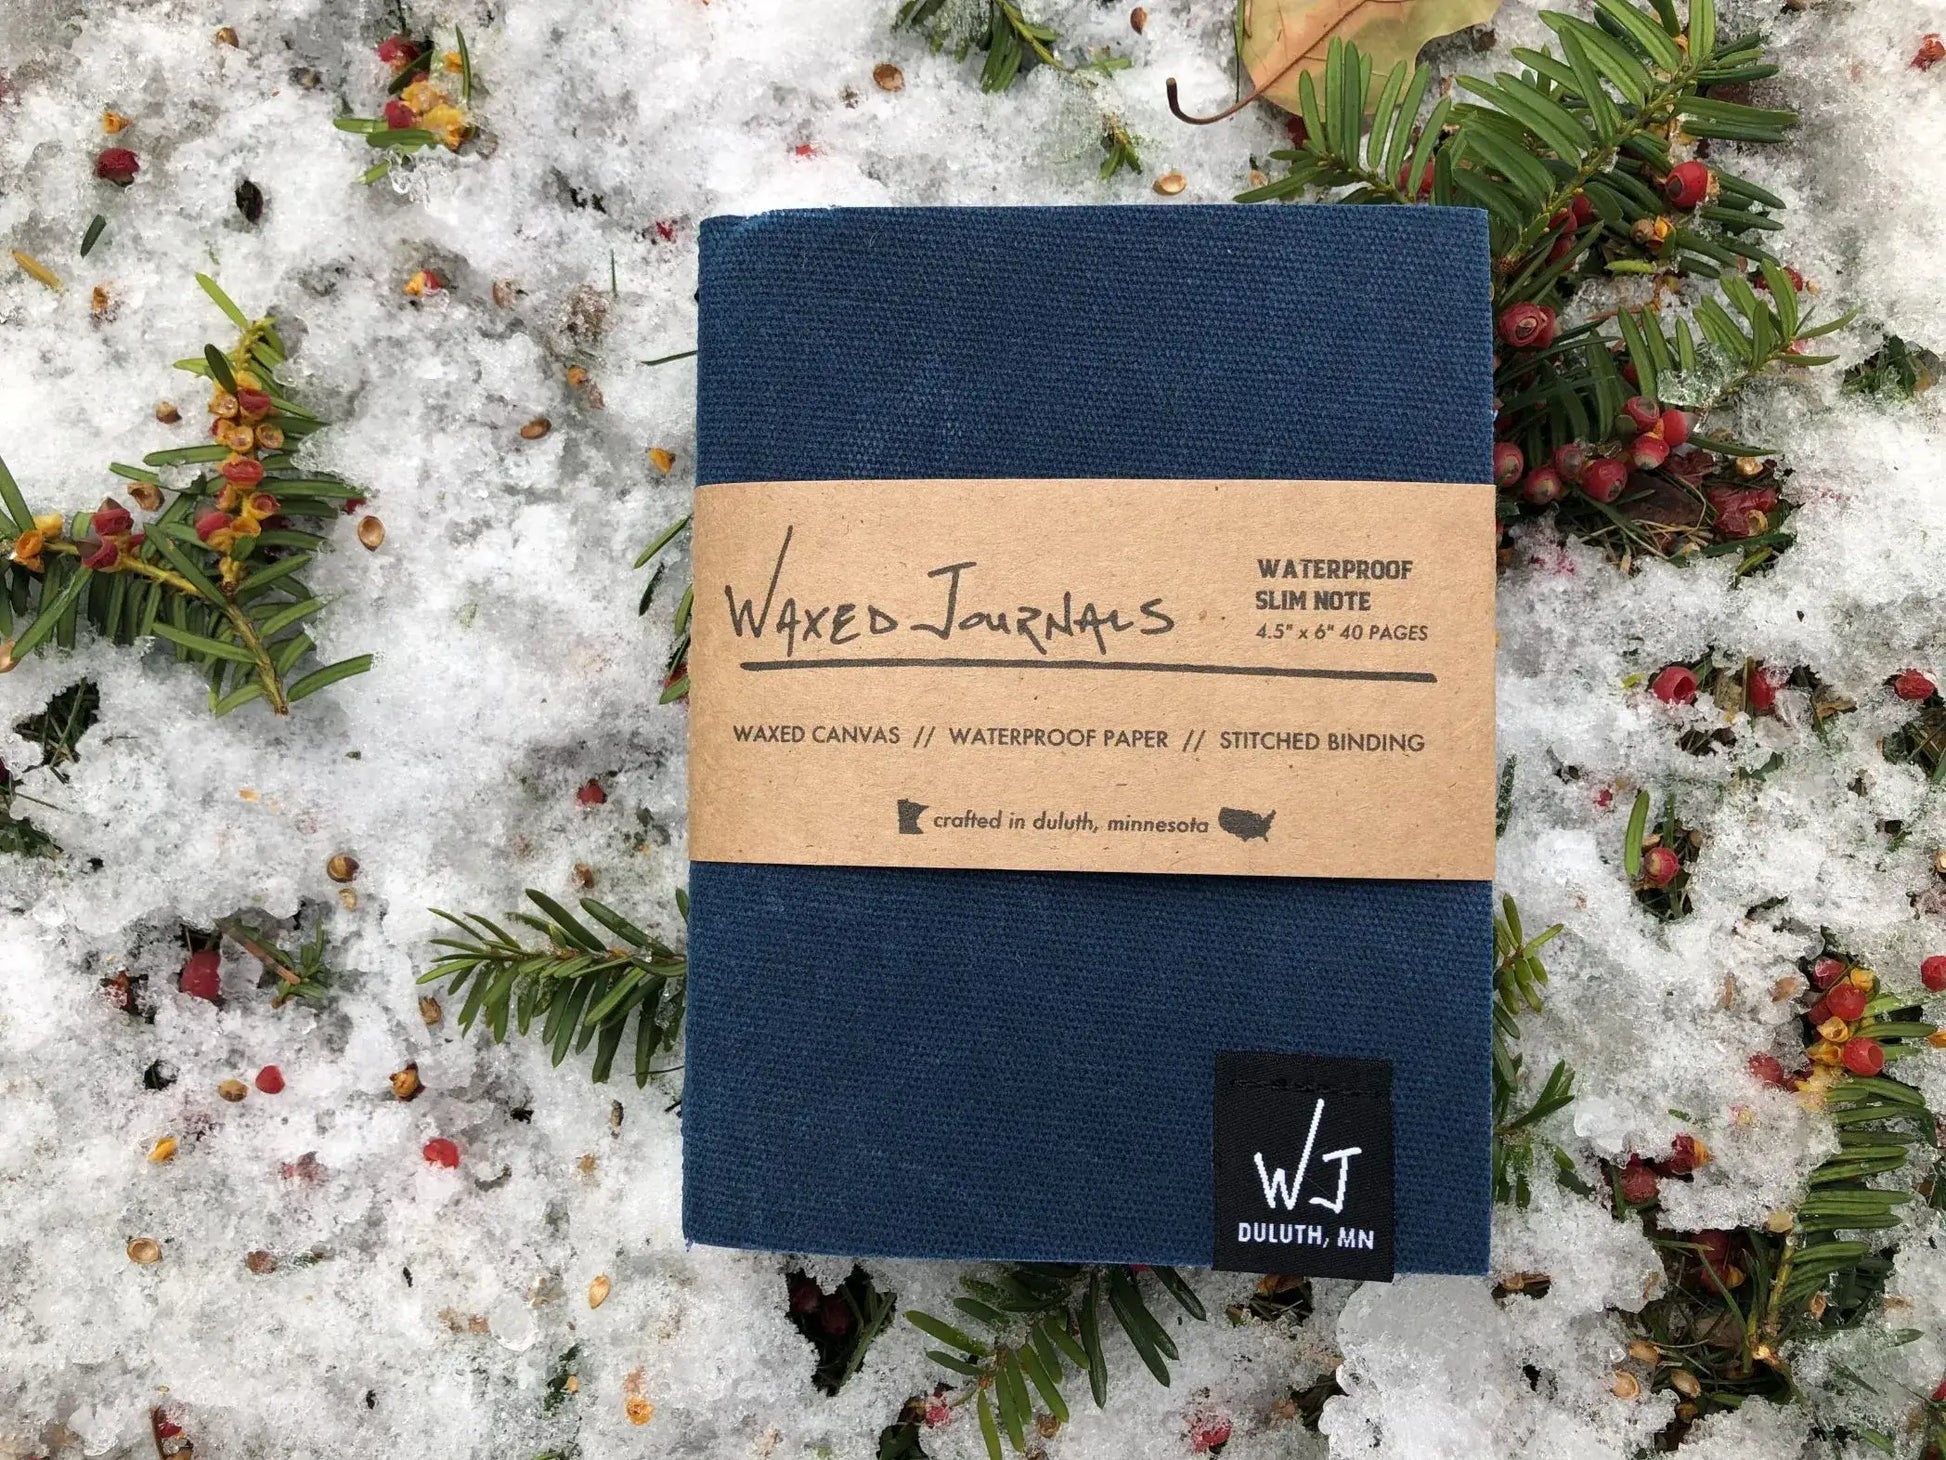 Blue waxed journal notebook in packaging outside on snow.